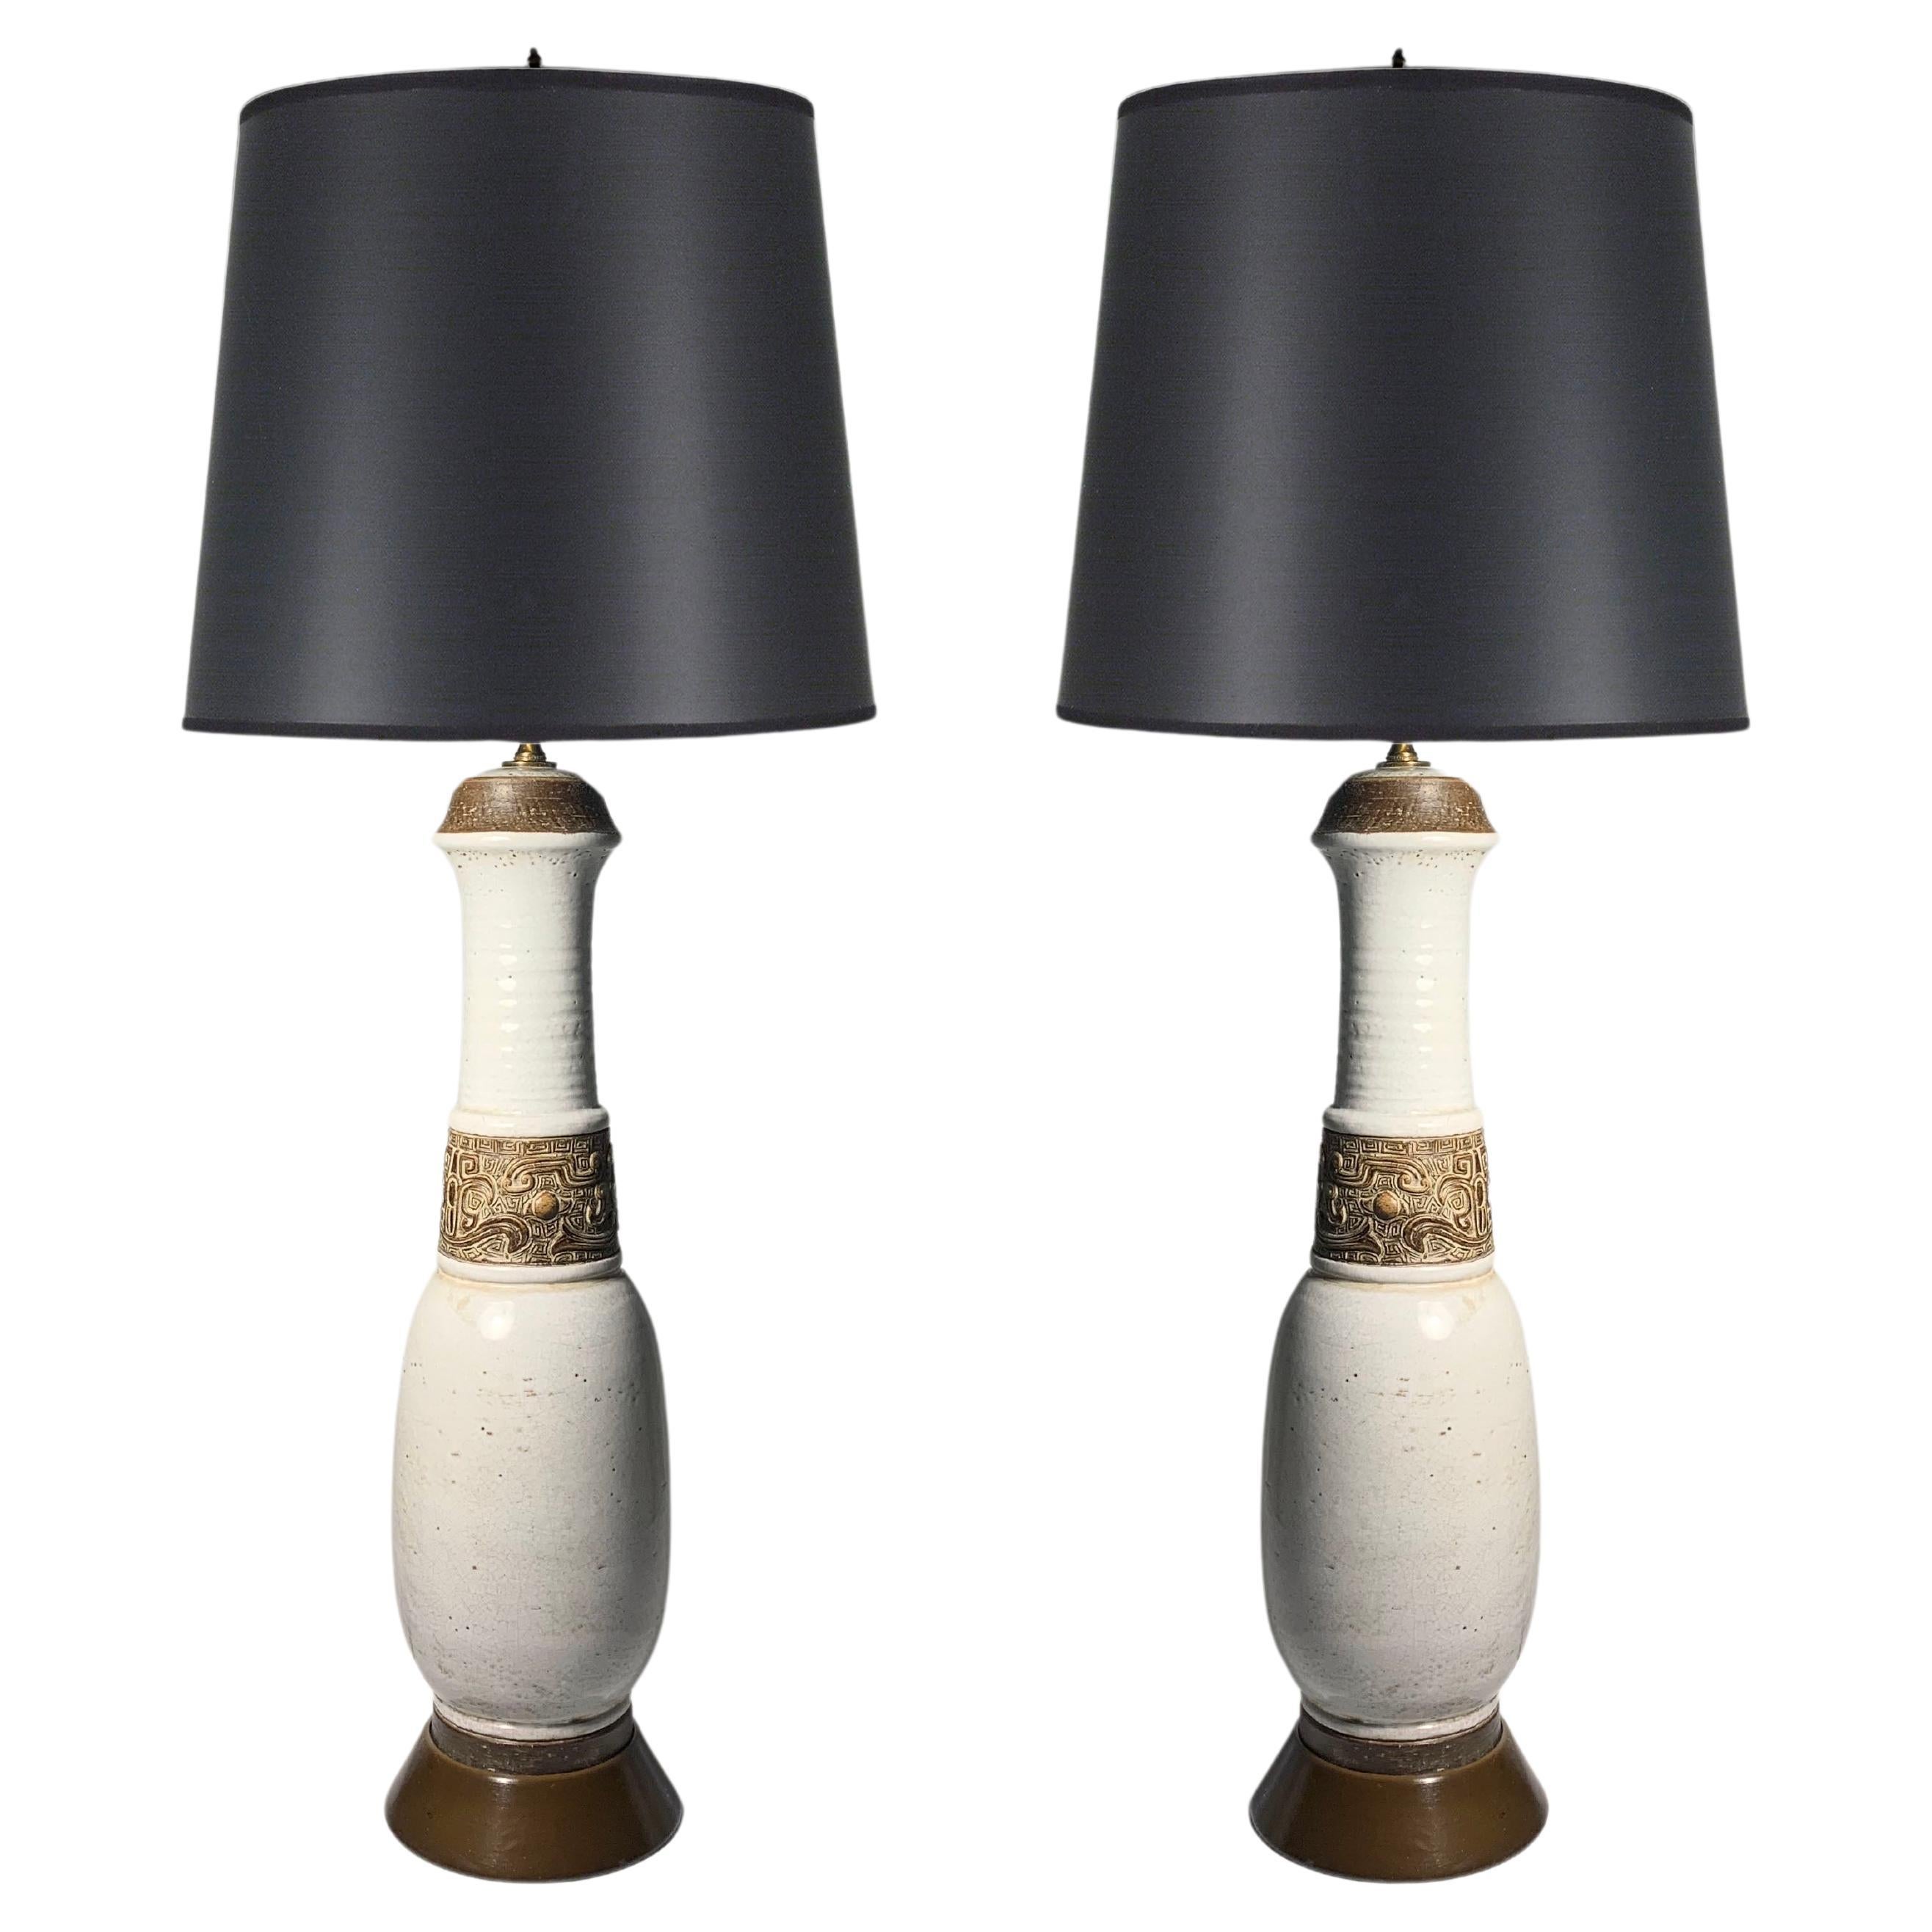 Pair of White Italian Ceramic Table Lamps by Zaccagnini / Oriental Chinoiserie For Sale